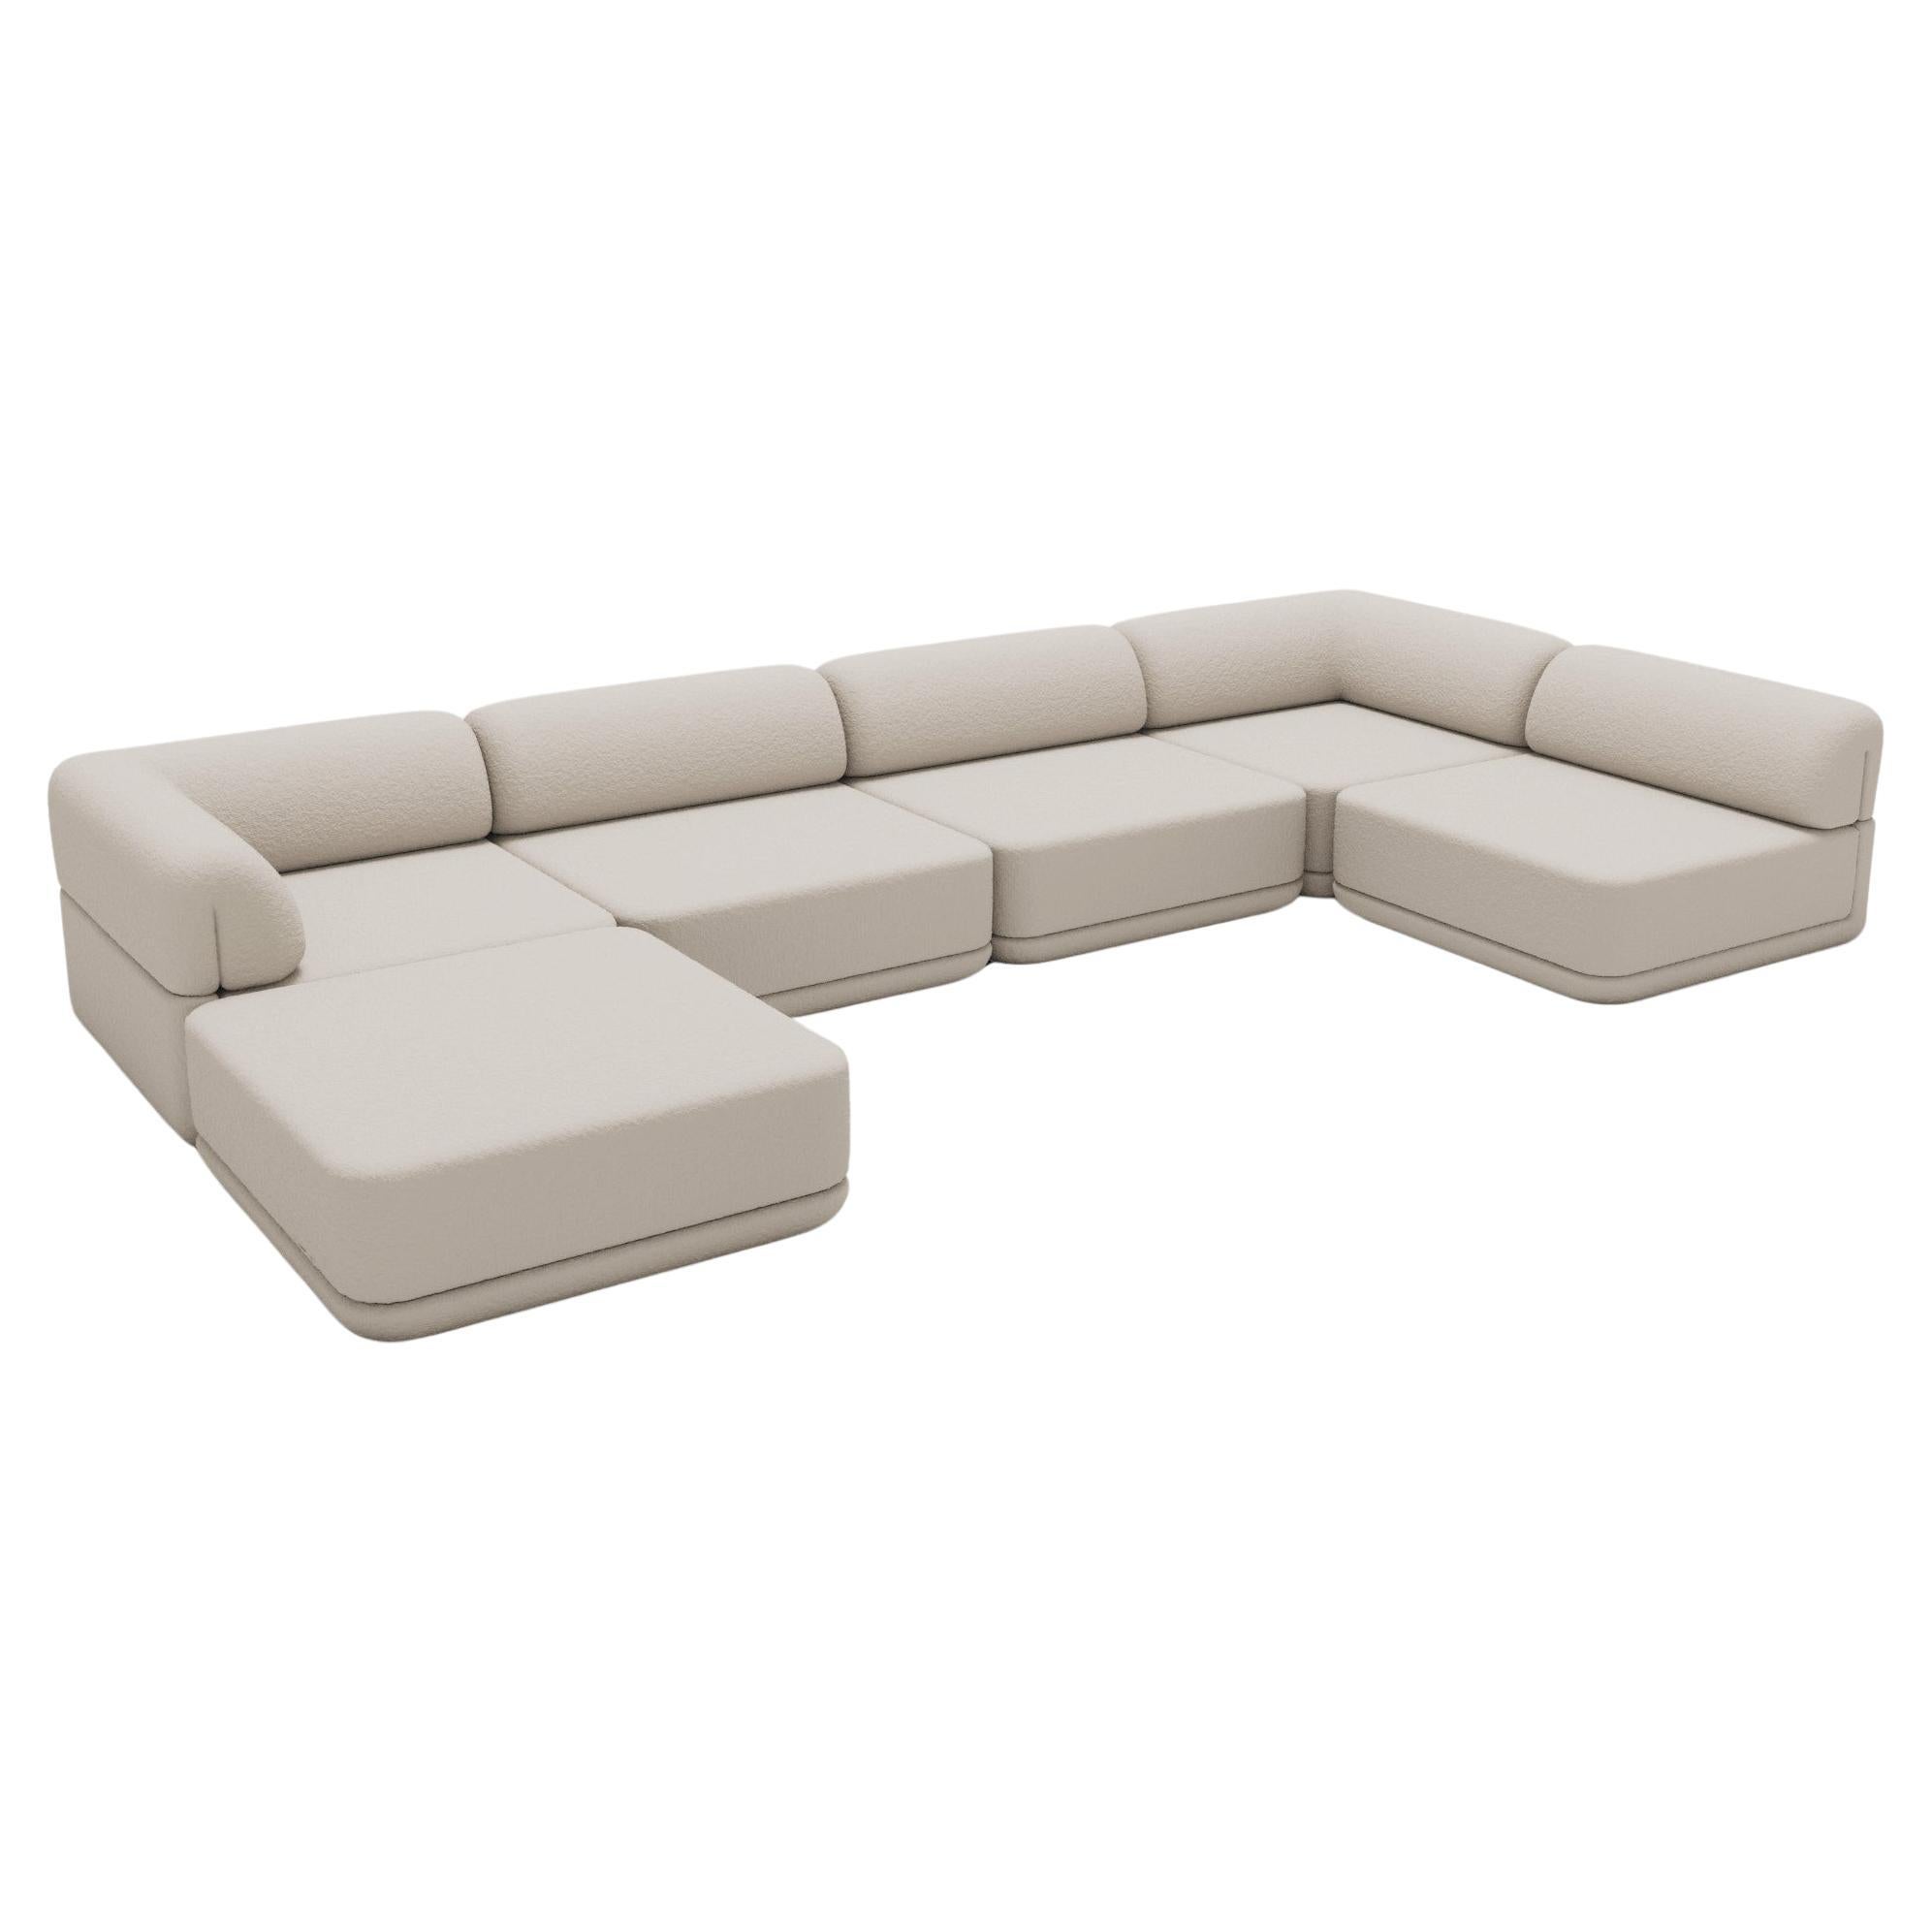 The Cube Sofa - Low Lounge Sectional For Sale